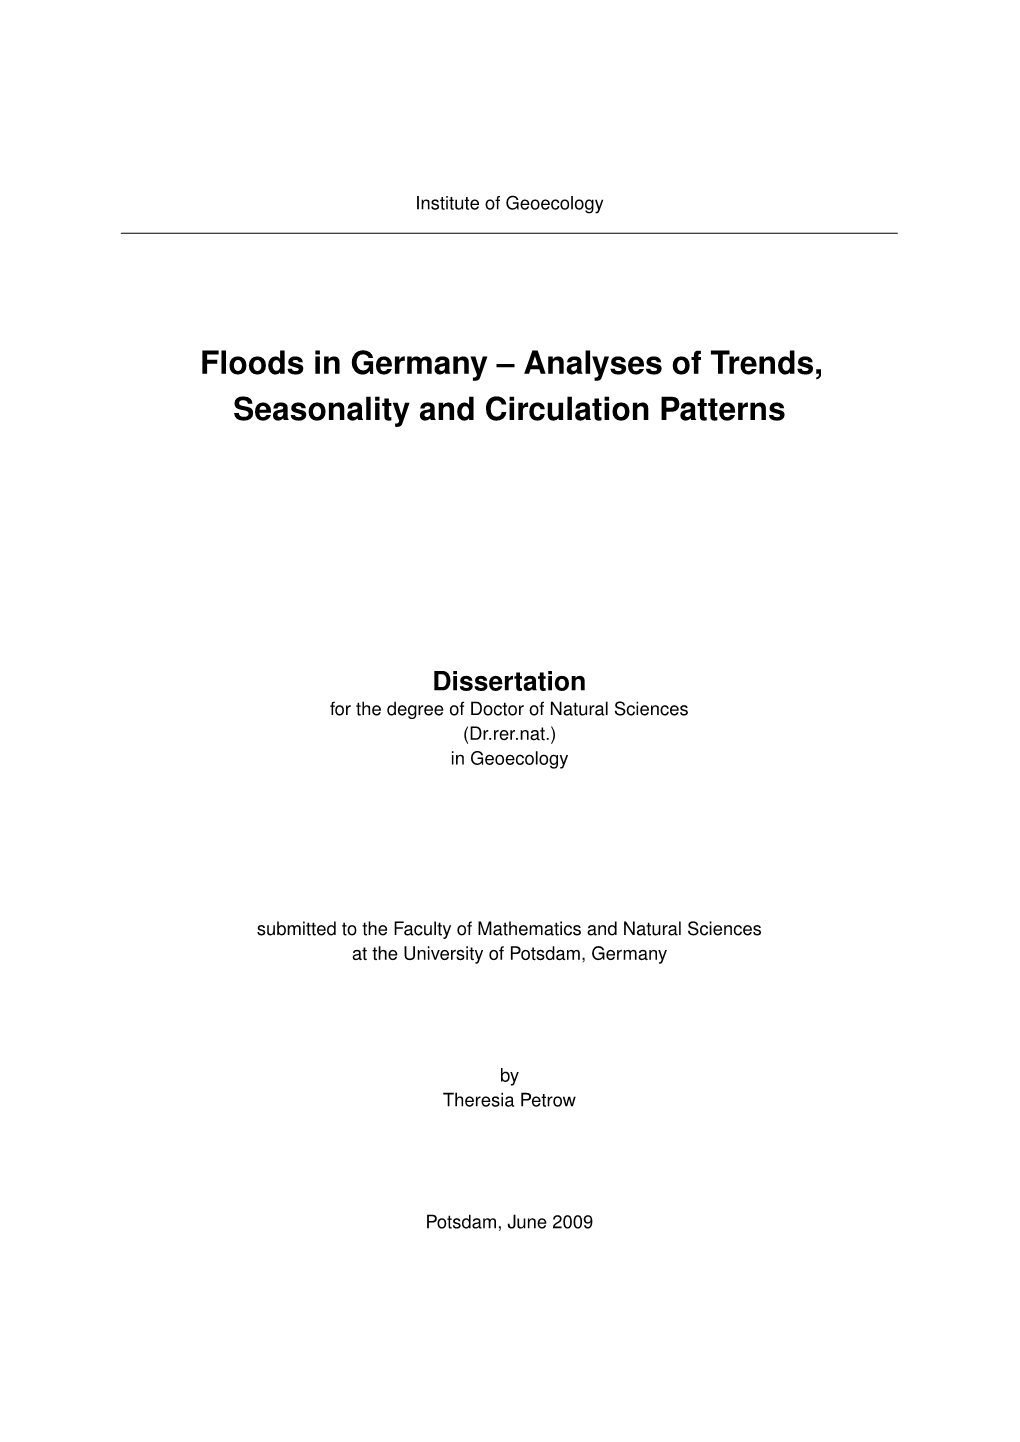 Floods in Germany – Analyses of Trends, Seasonality and Circulation Patterns